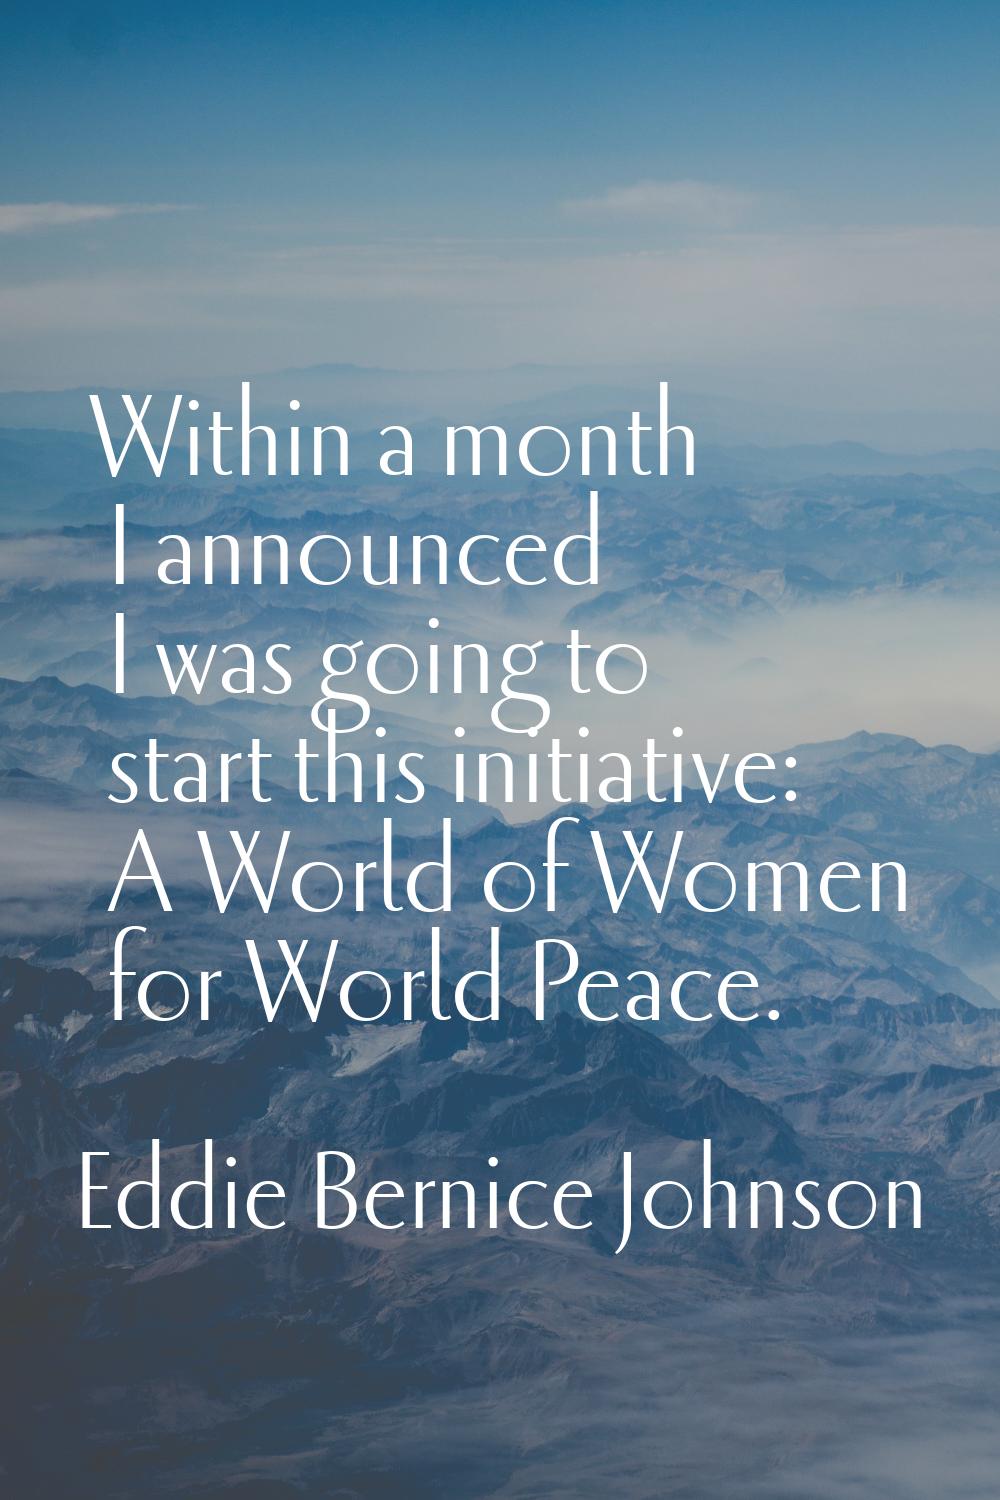 Within a month I announced I was going to start this initiative: A World of Women for World Peace.